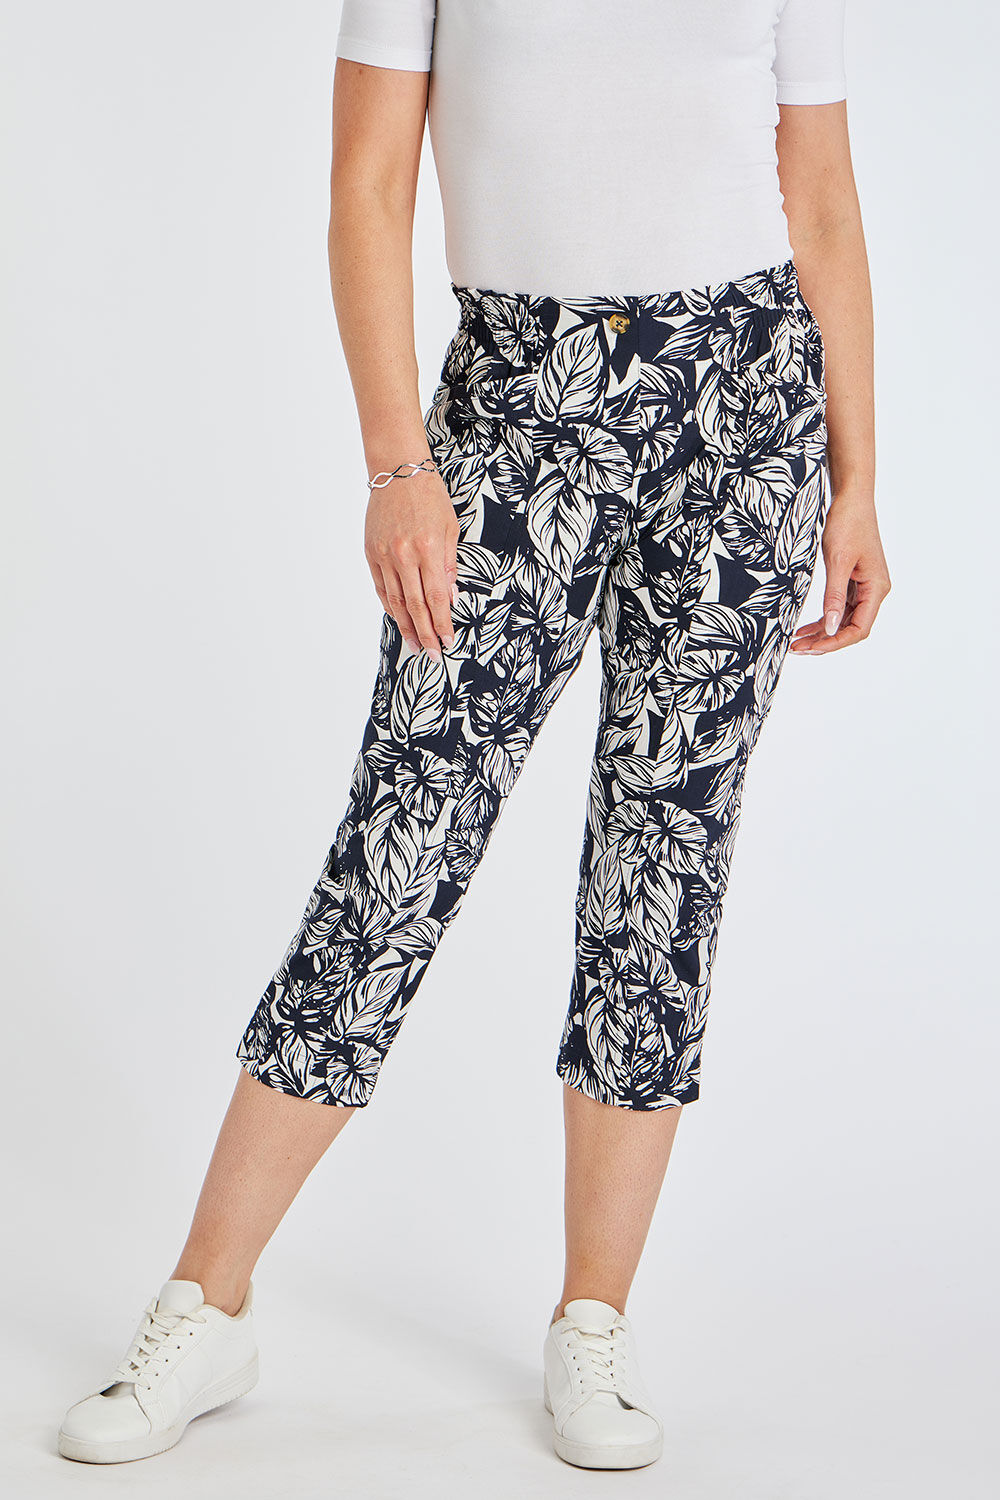 Bonmarche Navy Leaf Print Elasticated Back Essential Cropped Trousers, Size: 24